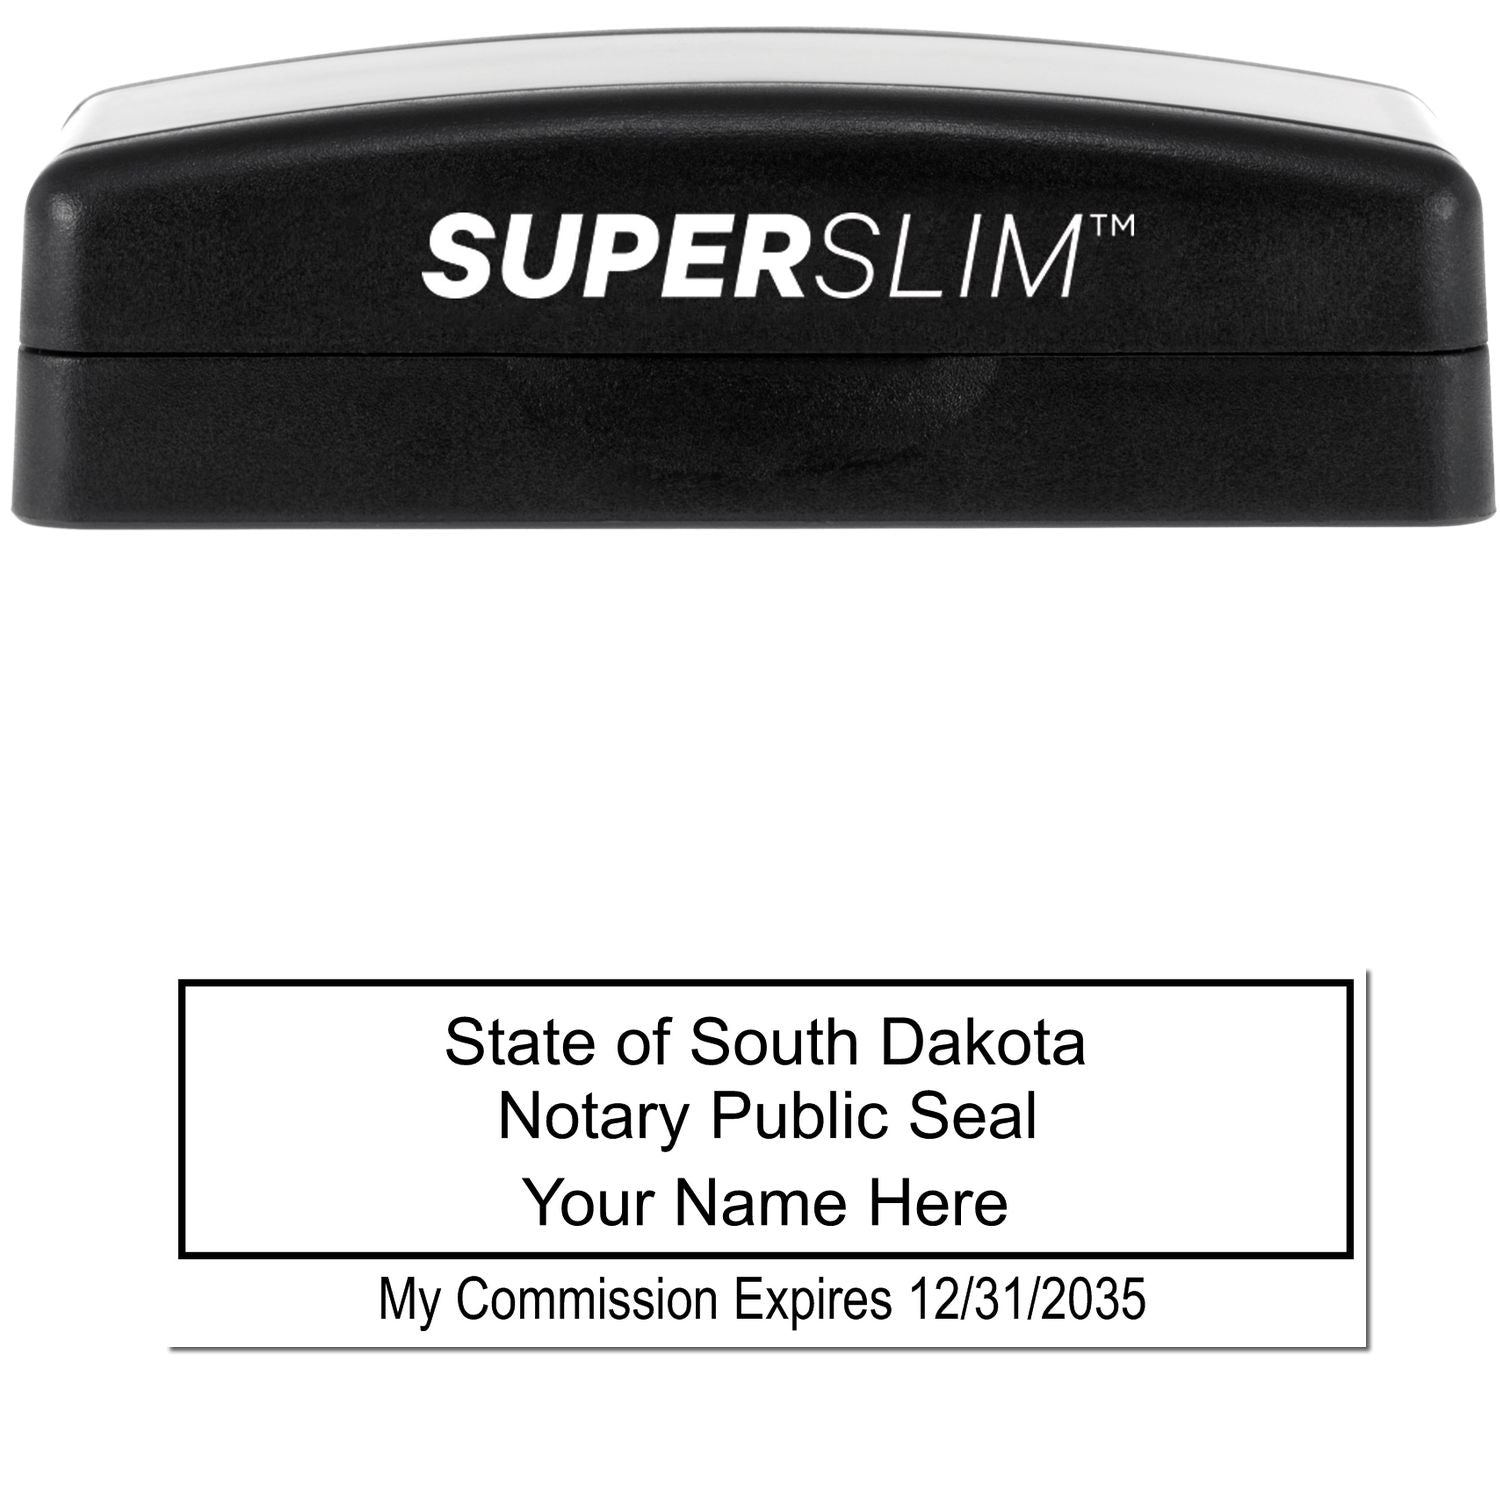 The main image for the Super Slim South Dakota Notary Public Stamp depicting a sample of the imprint and electronic files